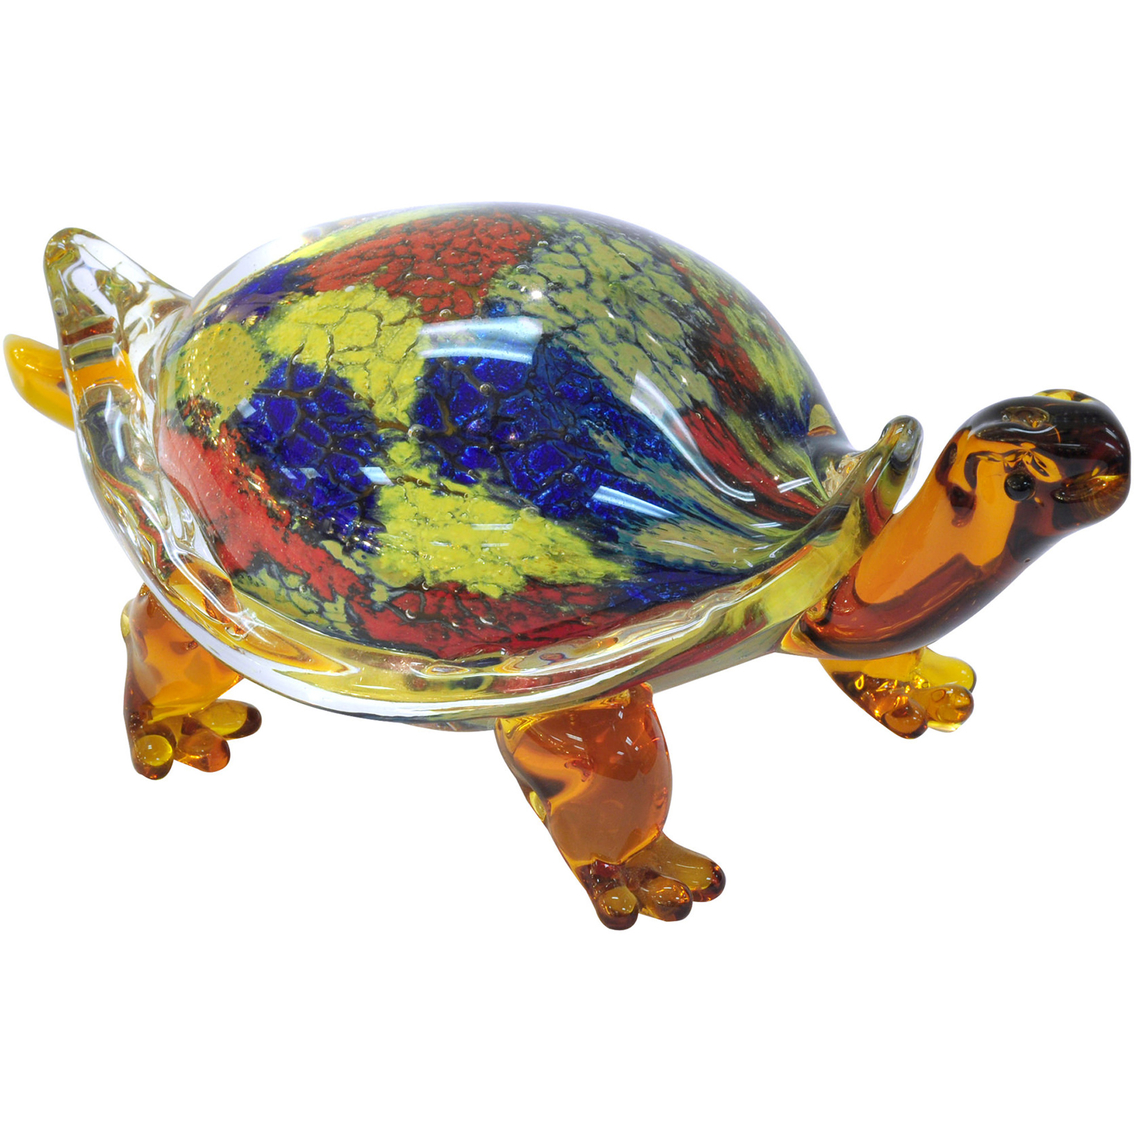 Dale Tiffany Tracey Turtle Handcrafted Art Glass Figurine - Image 1 of 2